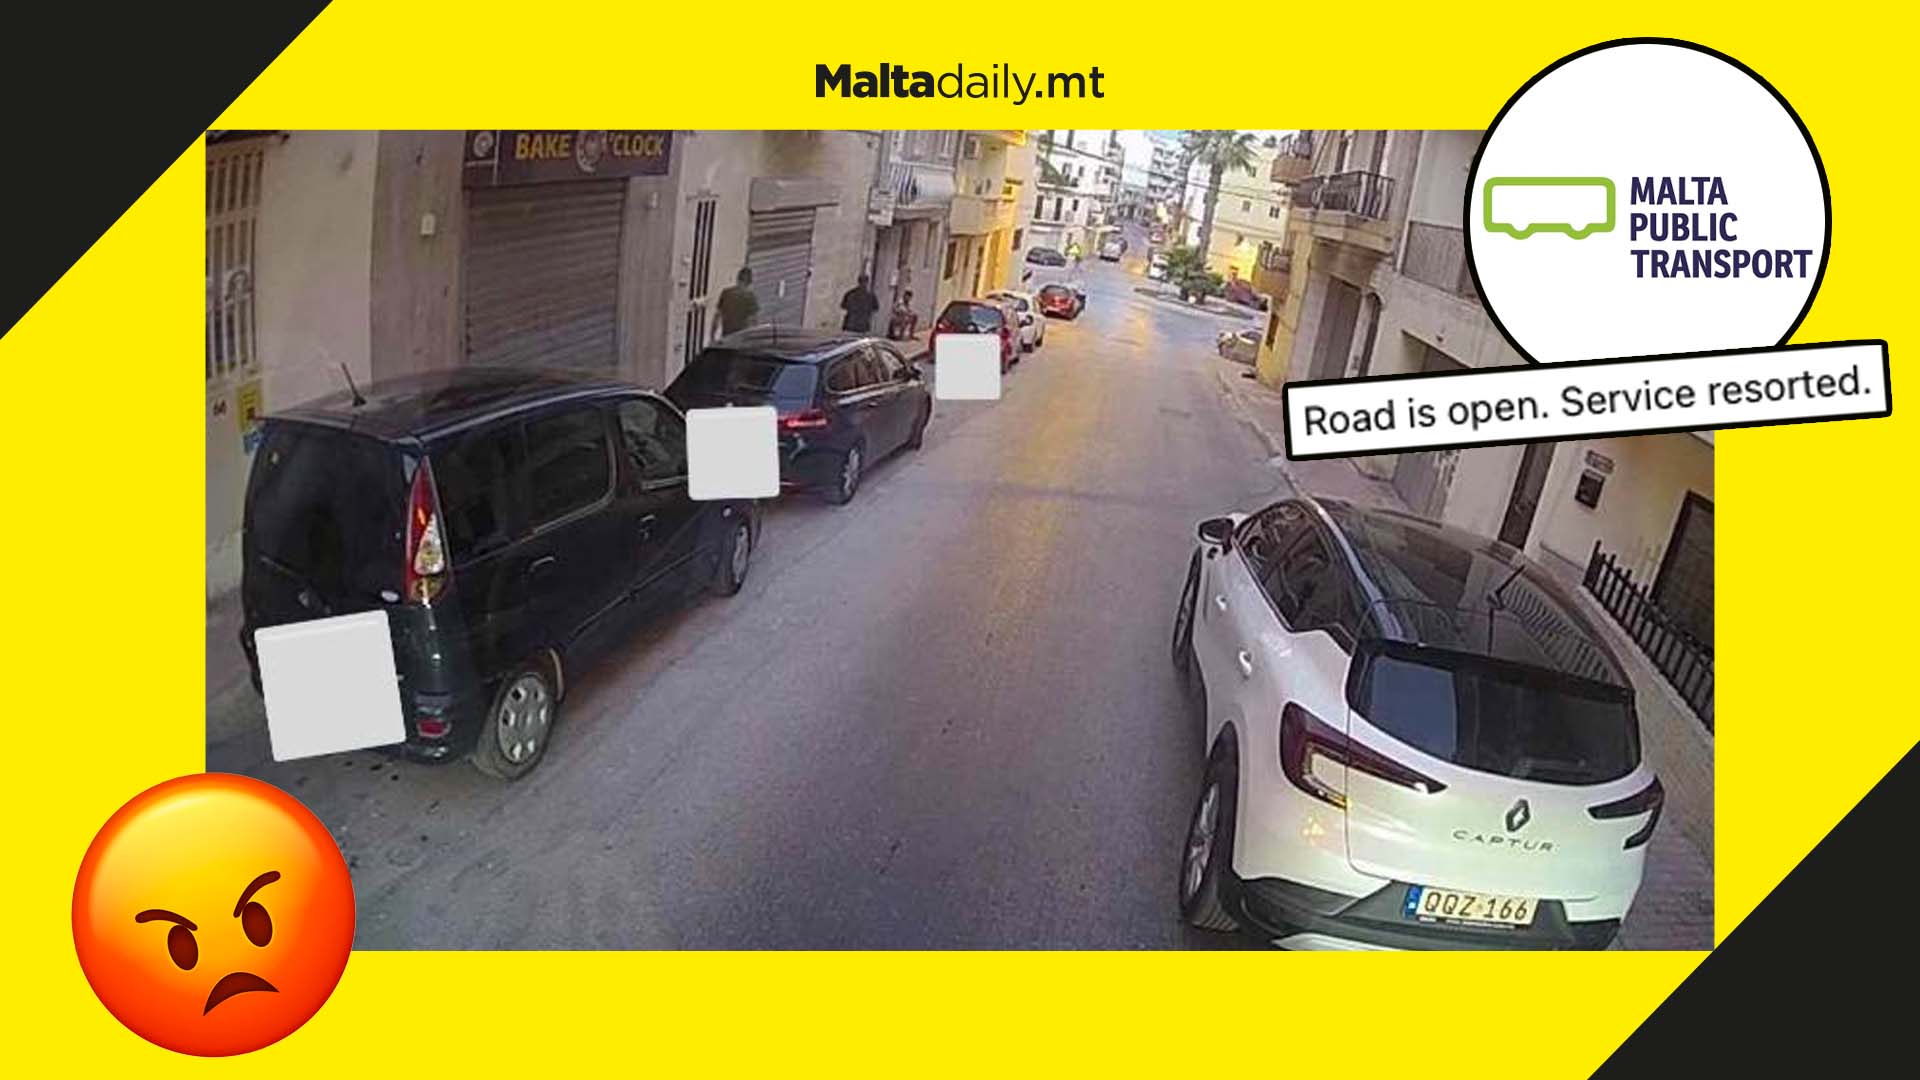 Carelessly parked leased car causes massive Tallinja delays